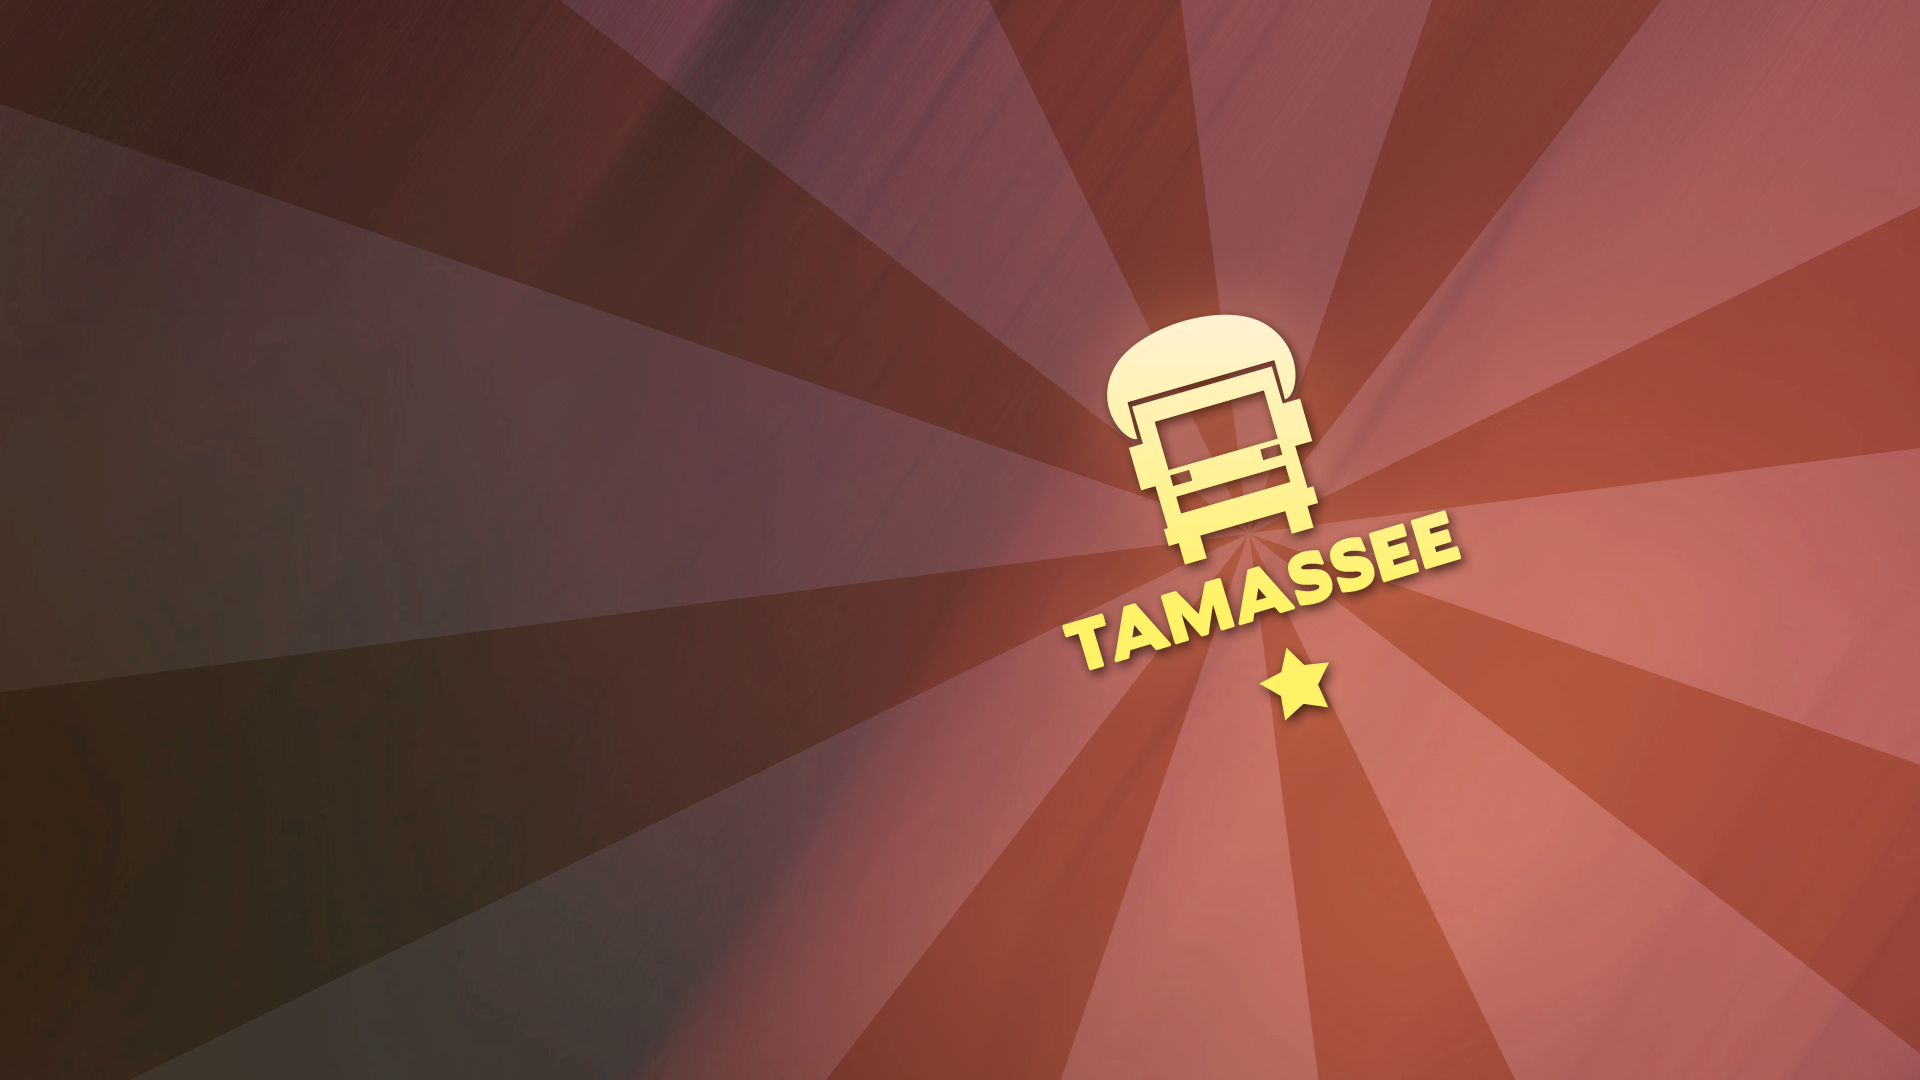 Icon for Tank truck insignia 'Tamassee'